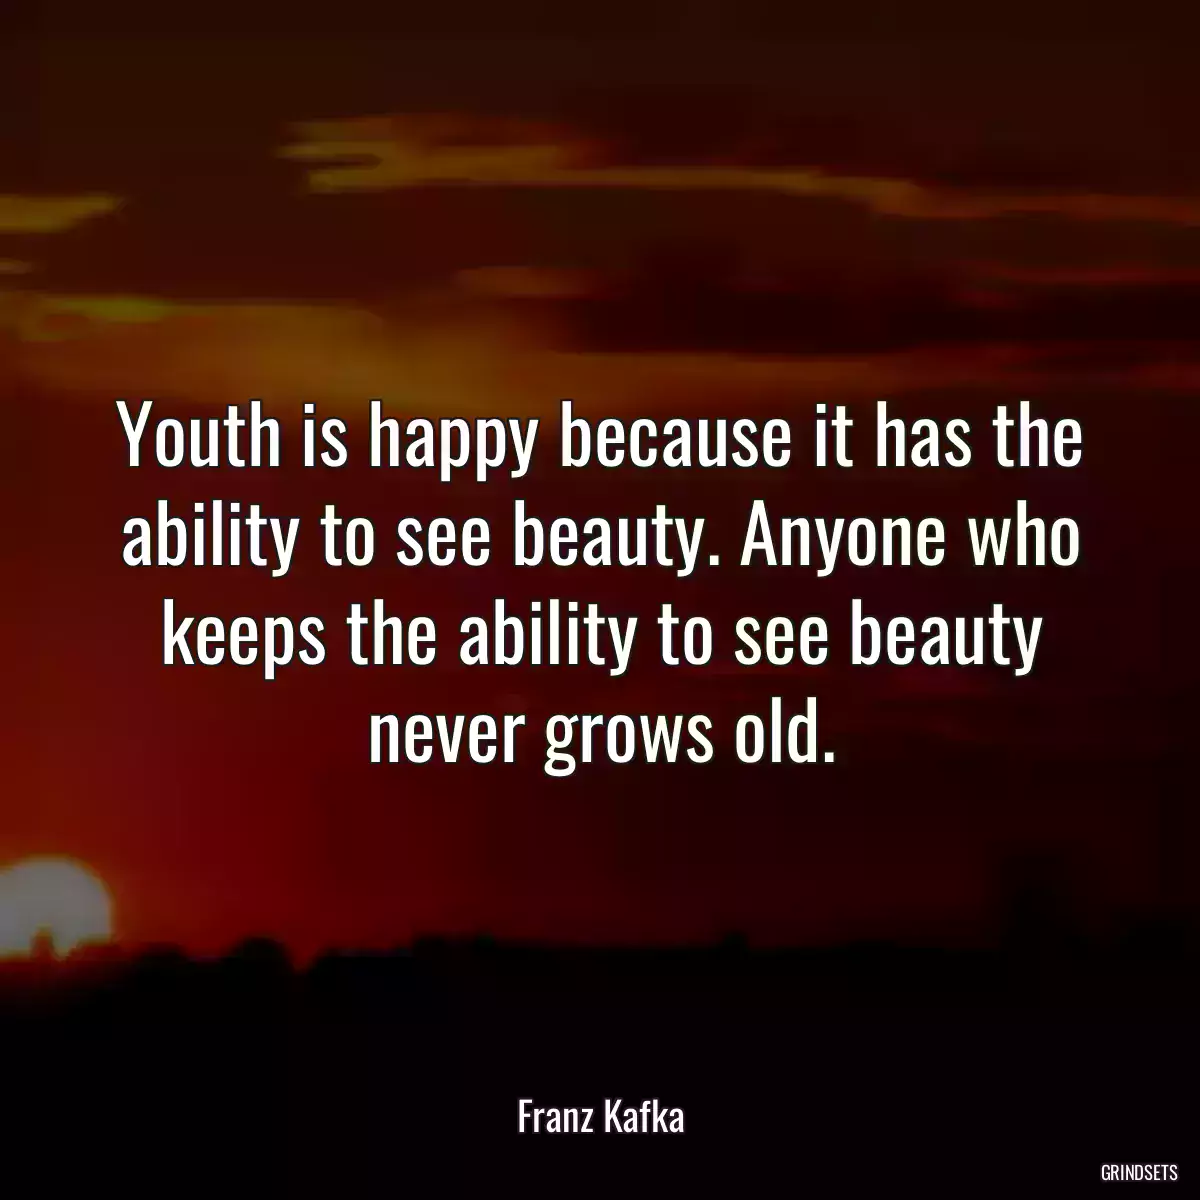 Youth is happy because it has the ability to see beauty. Anyone who keeps the ability to see beauty never grows old.